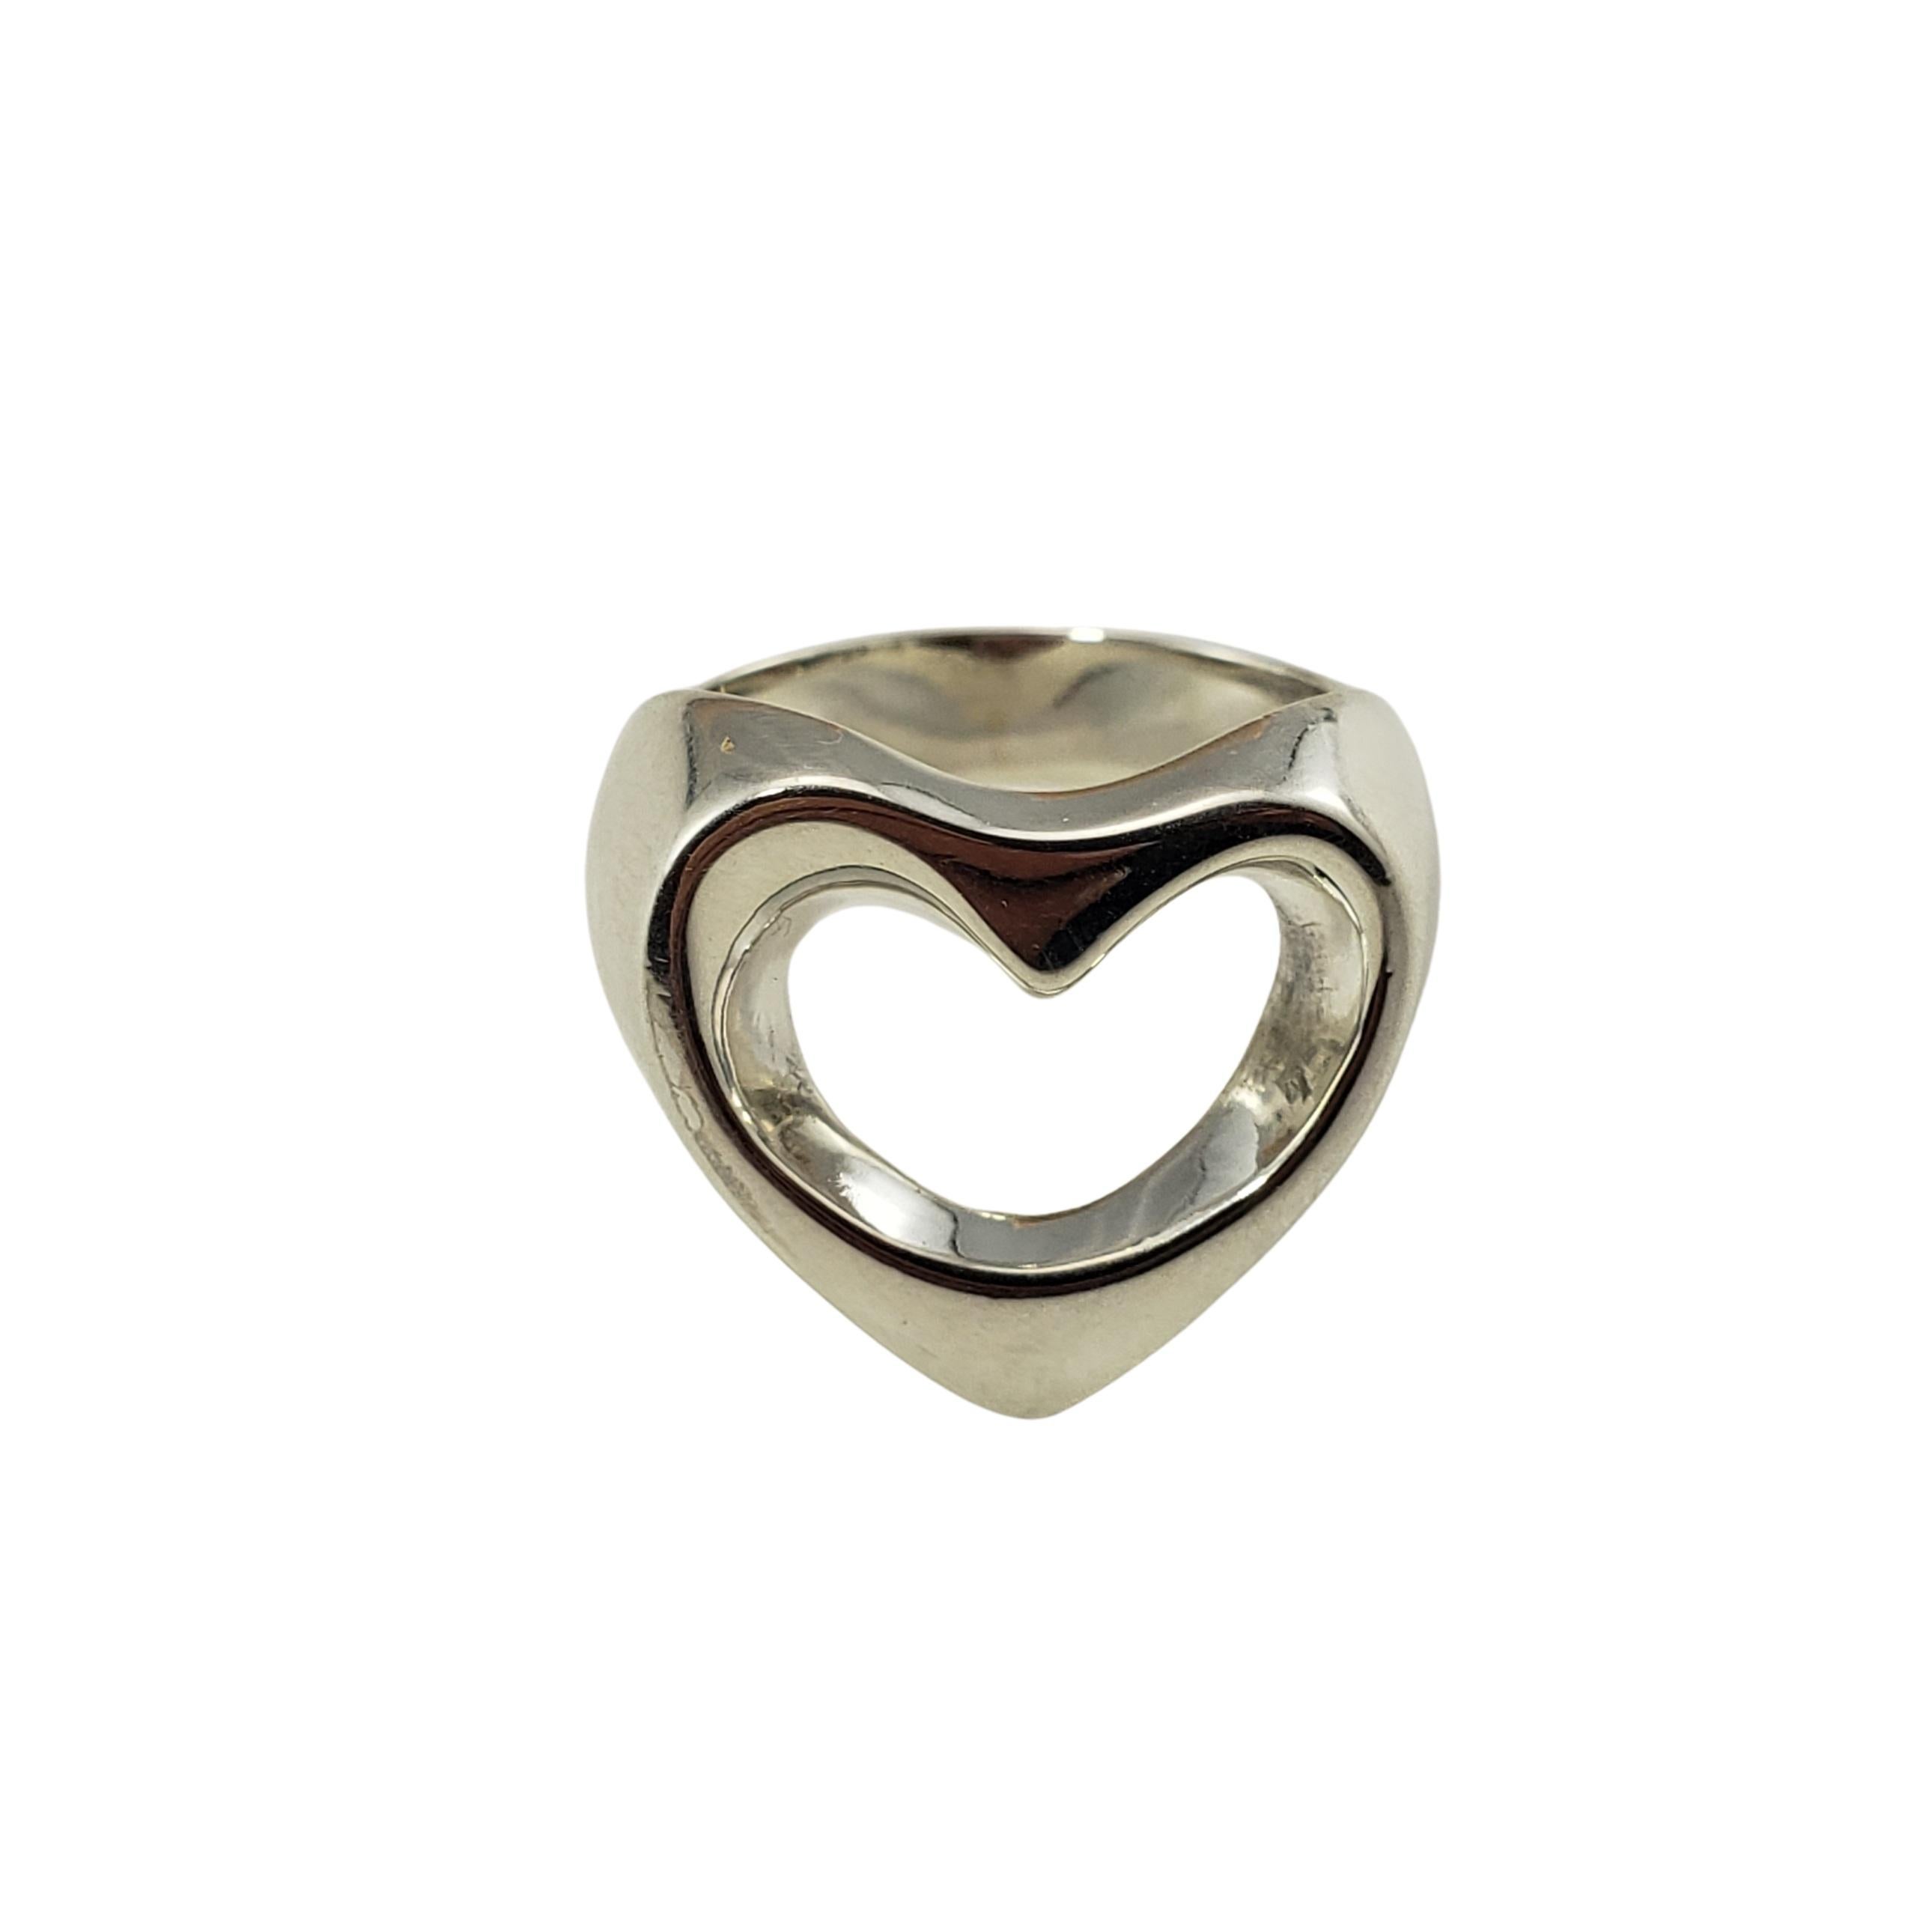 Vintage Georg Jensen Sterling Silver Heart Ring Size 6.25-

This stunning heart ring is crafted in  beautifully detailed sterling silver by Georg Jensen.  Width:  18 mm.  Shank:  4.5 mm.

Size: 6.25

Weight:  5.8 dwt. /  9.1 gr.

Stamped:  925  S 